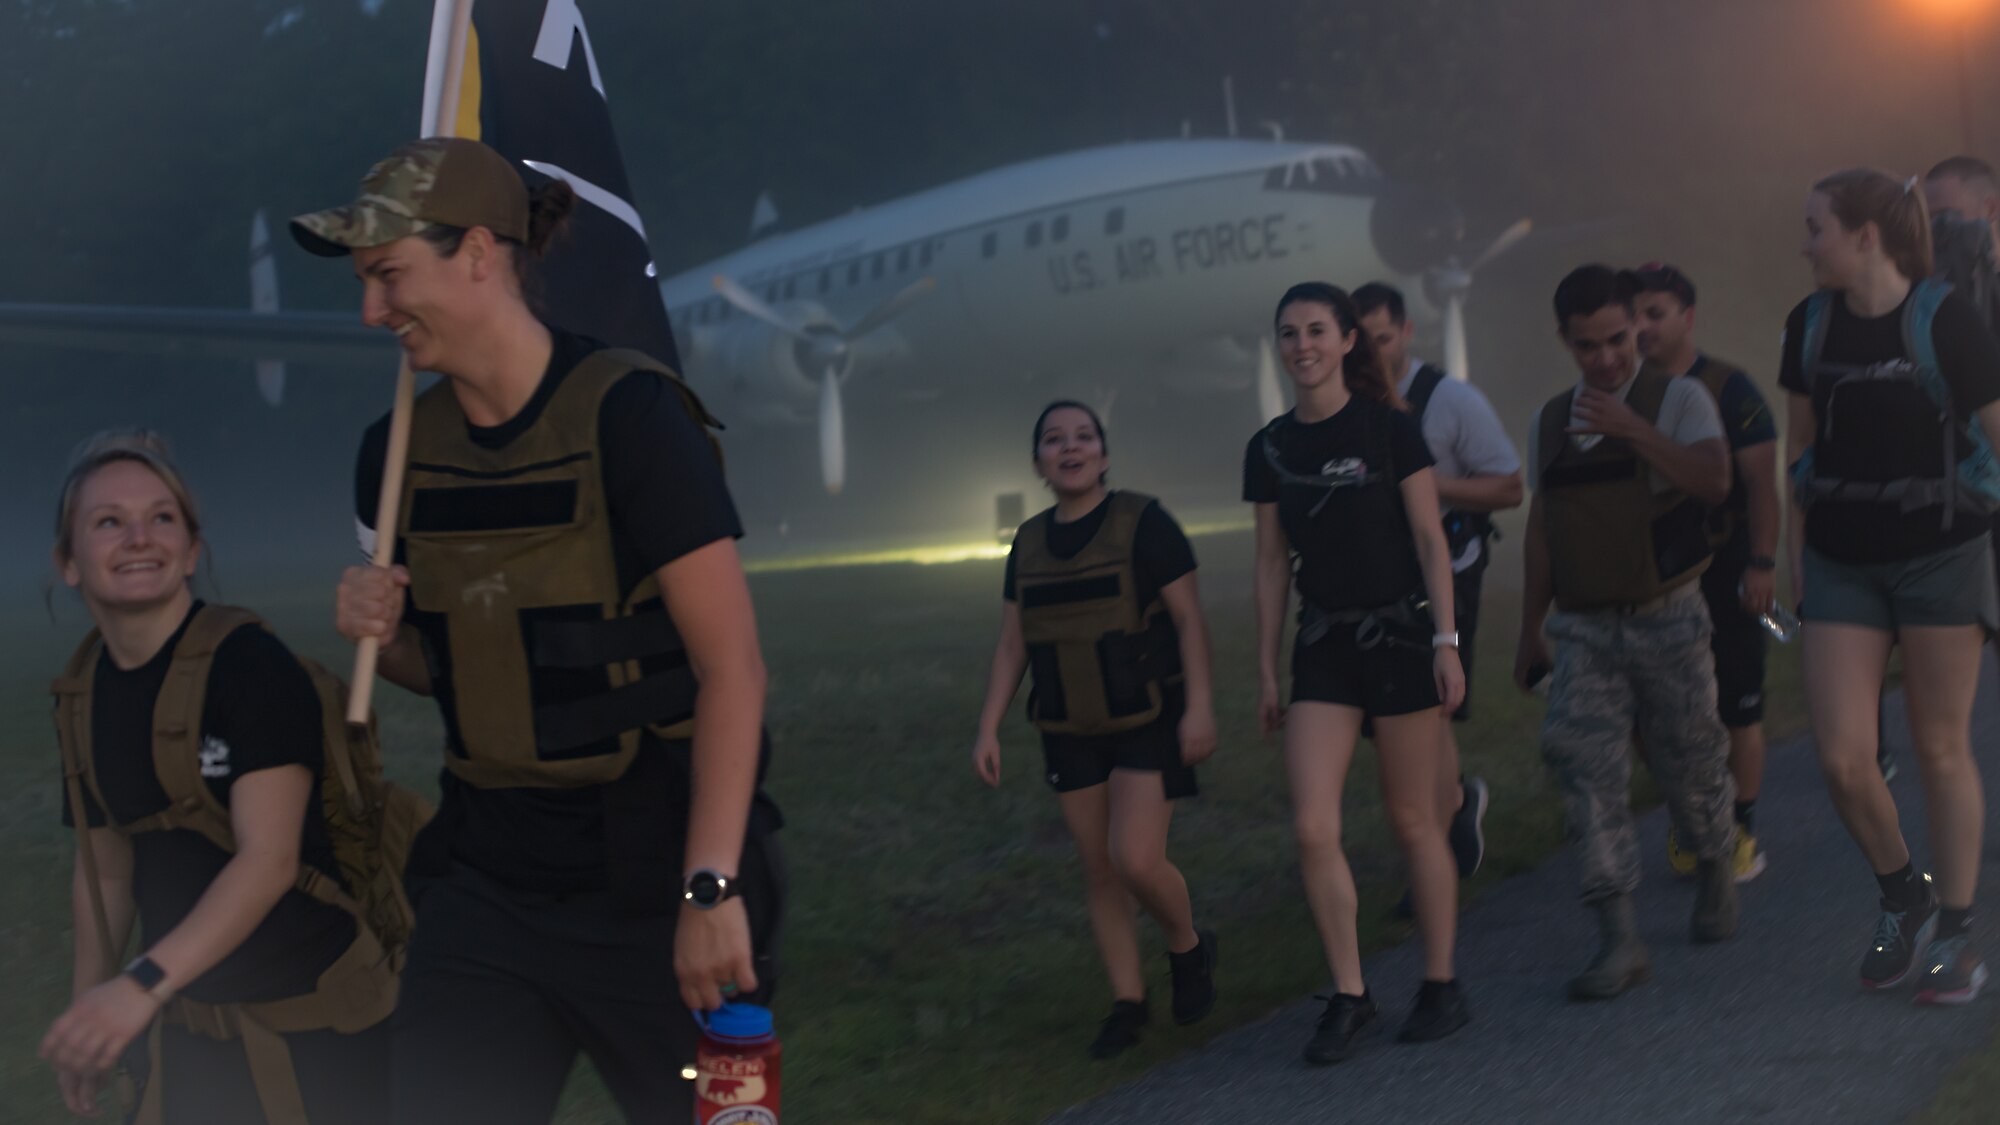 Airmen ruck march along a running trail May 1, 2019, at Joint Base Charleston, S.C. The Airmen participated in a nine-mile ruck march to remember the nine lives lost on May 2, 2018, in a C-130 aircraft crash in Port Wentworth, GA, in which JB Charleston, along with other agencies, provided response and recovery efforts.